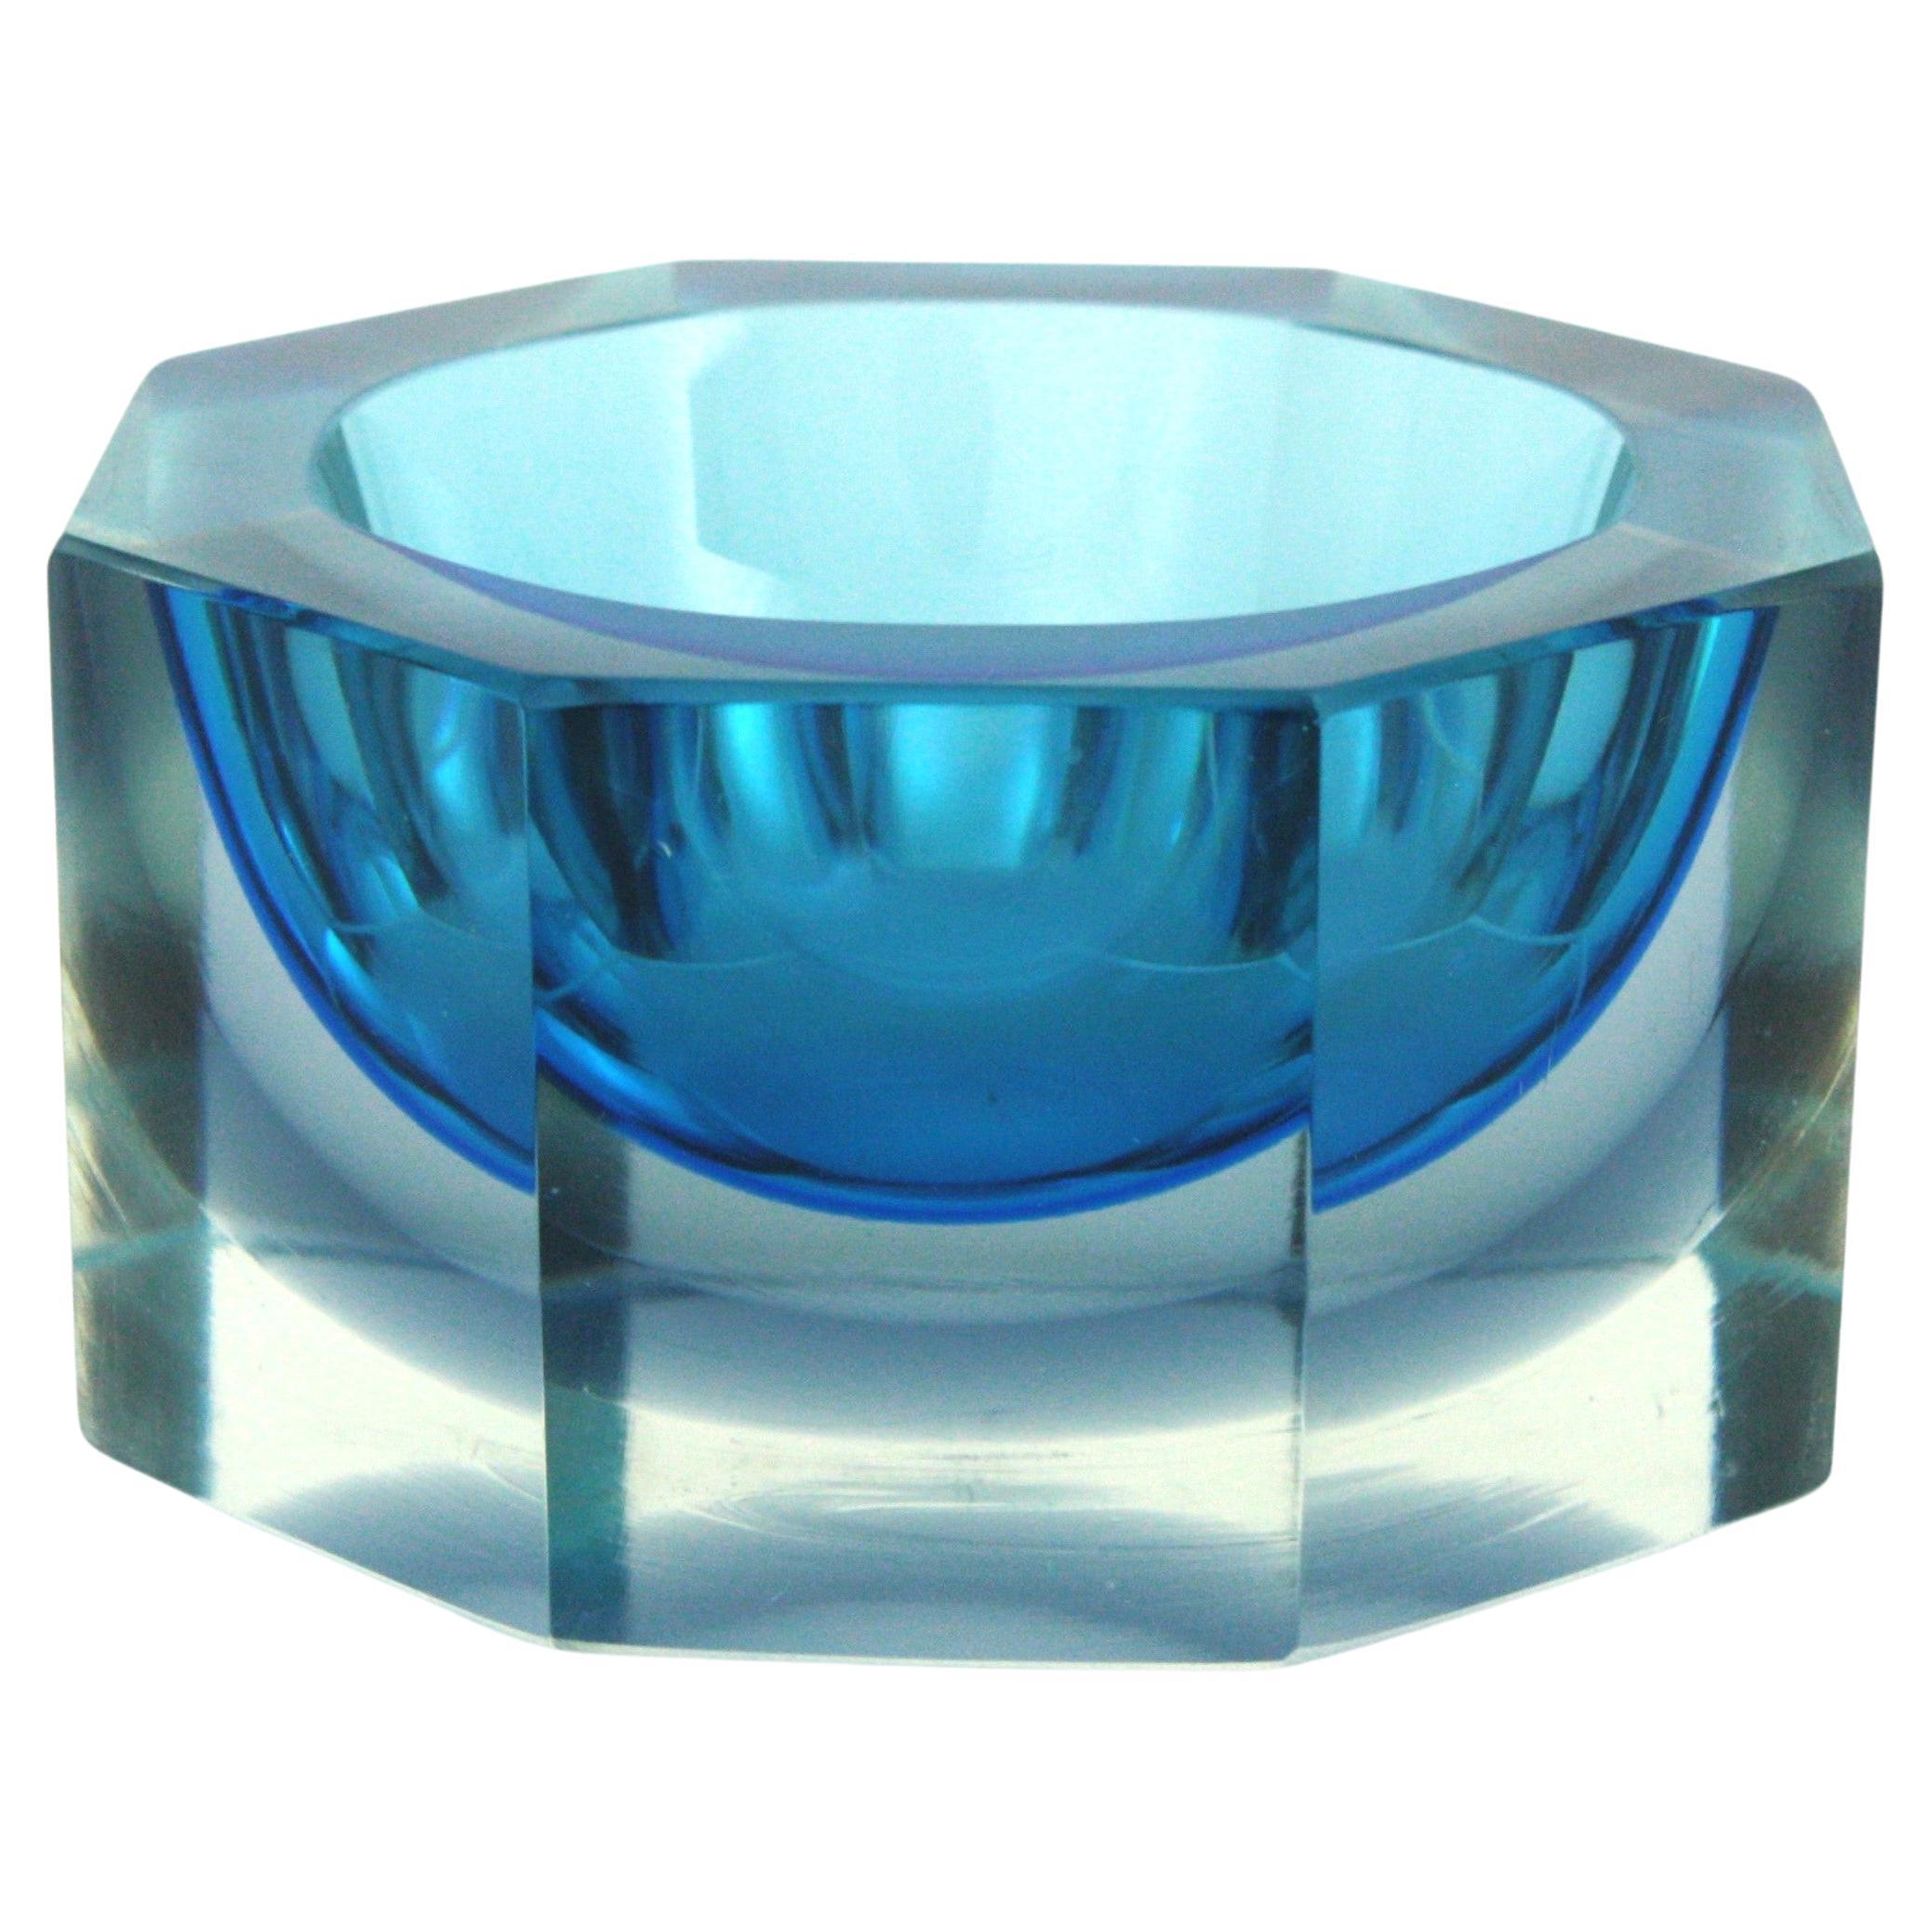 Faceted sommerso bowl, blue, clear murano glass, Flavio poli. Italy, 1950s.
Eye-catching eight sided blue and clear block cut faceted bowl or ashtray. Attributed to Flavio Poli.
Blue glass with a layer of darker glass cased into clear glass using